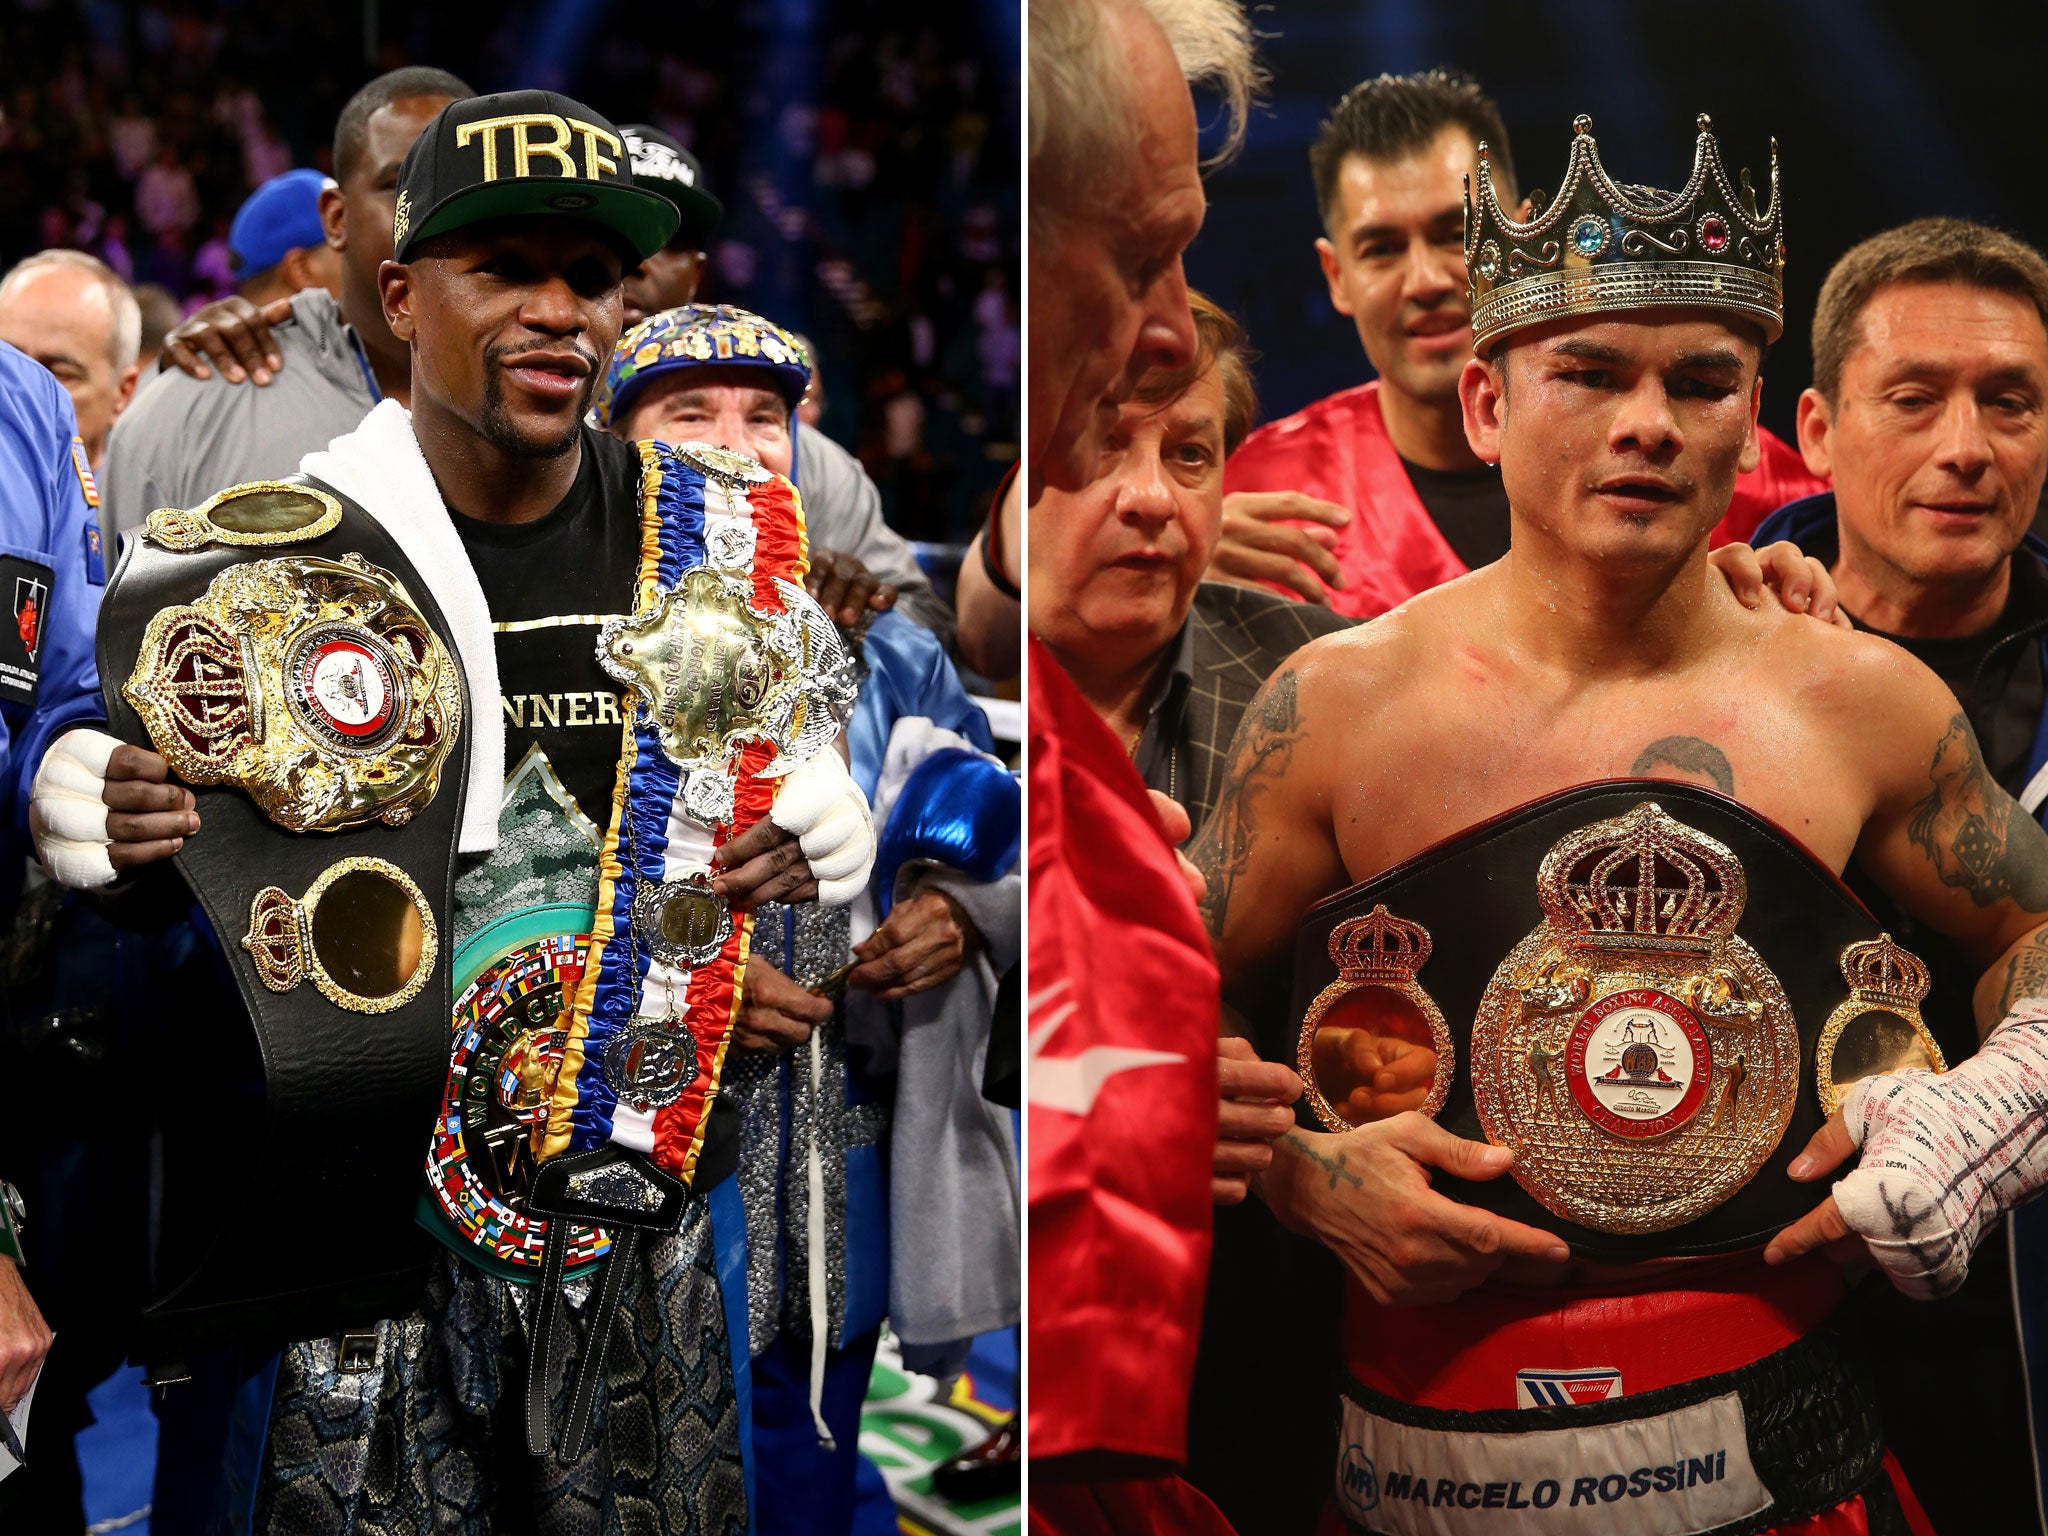 Floyd Mayweather and Marcos Maidana will face off in a welterweight unification bout, scuppering the chance of Amir Khan facing the pound-for-pound king